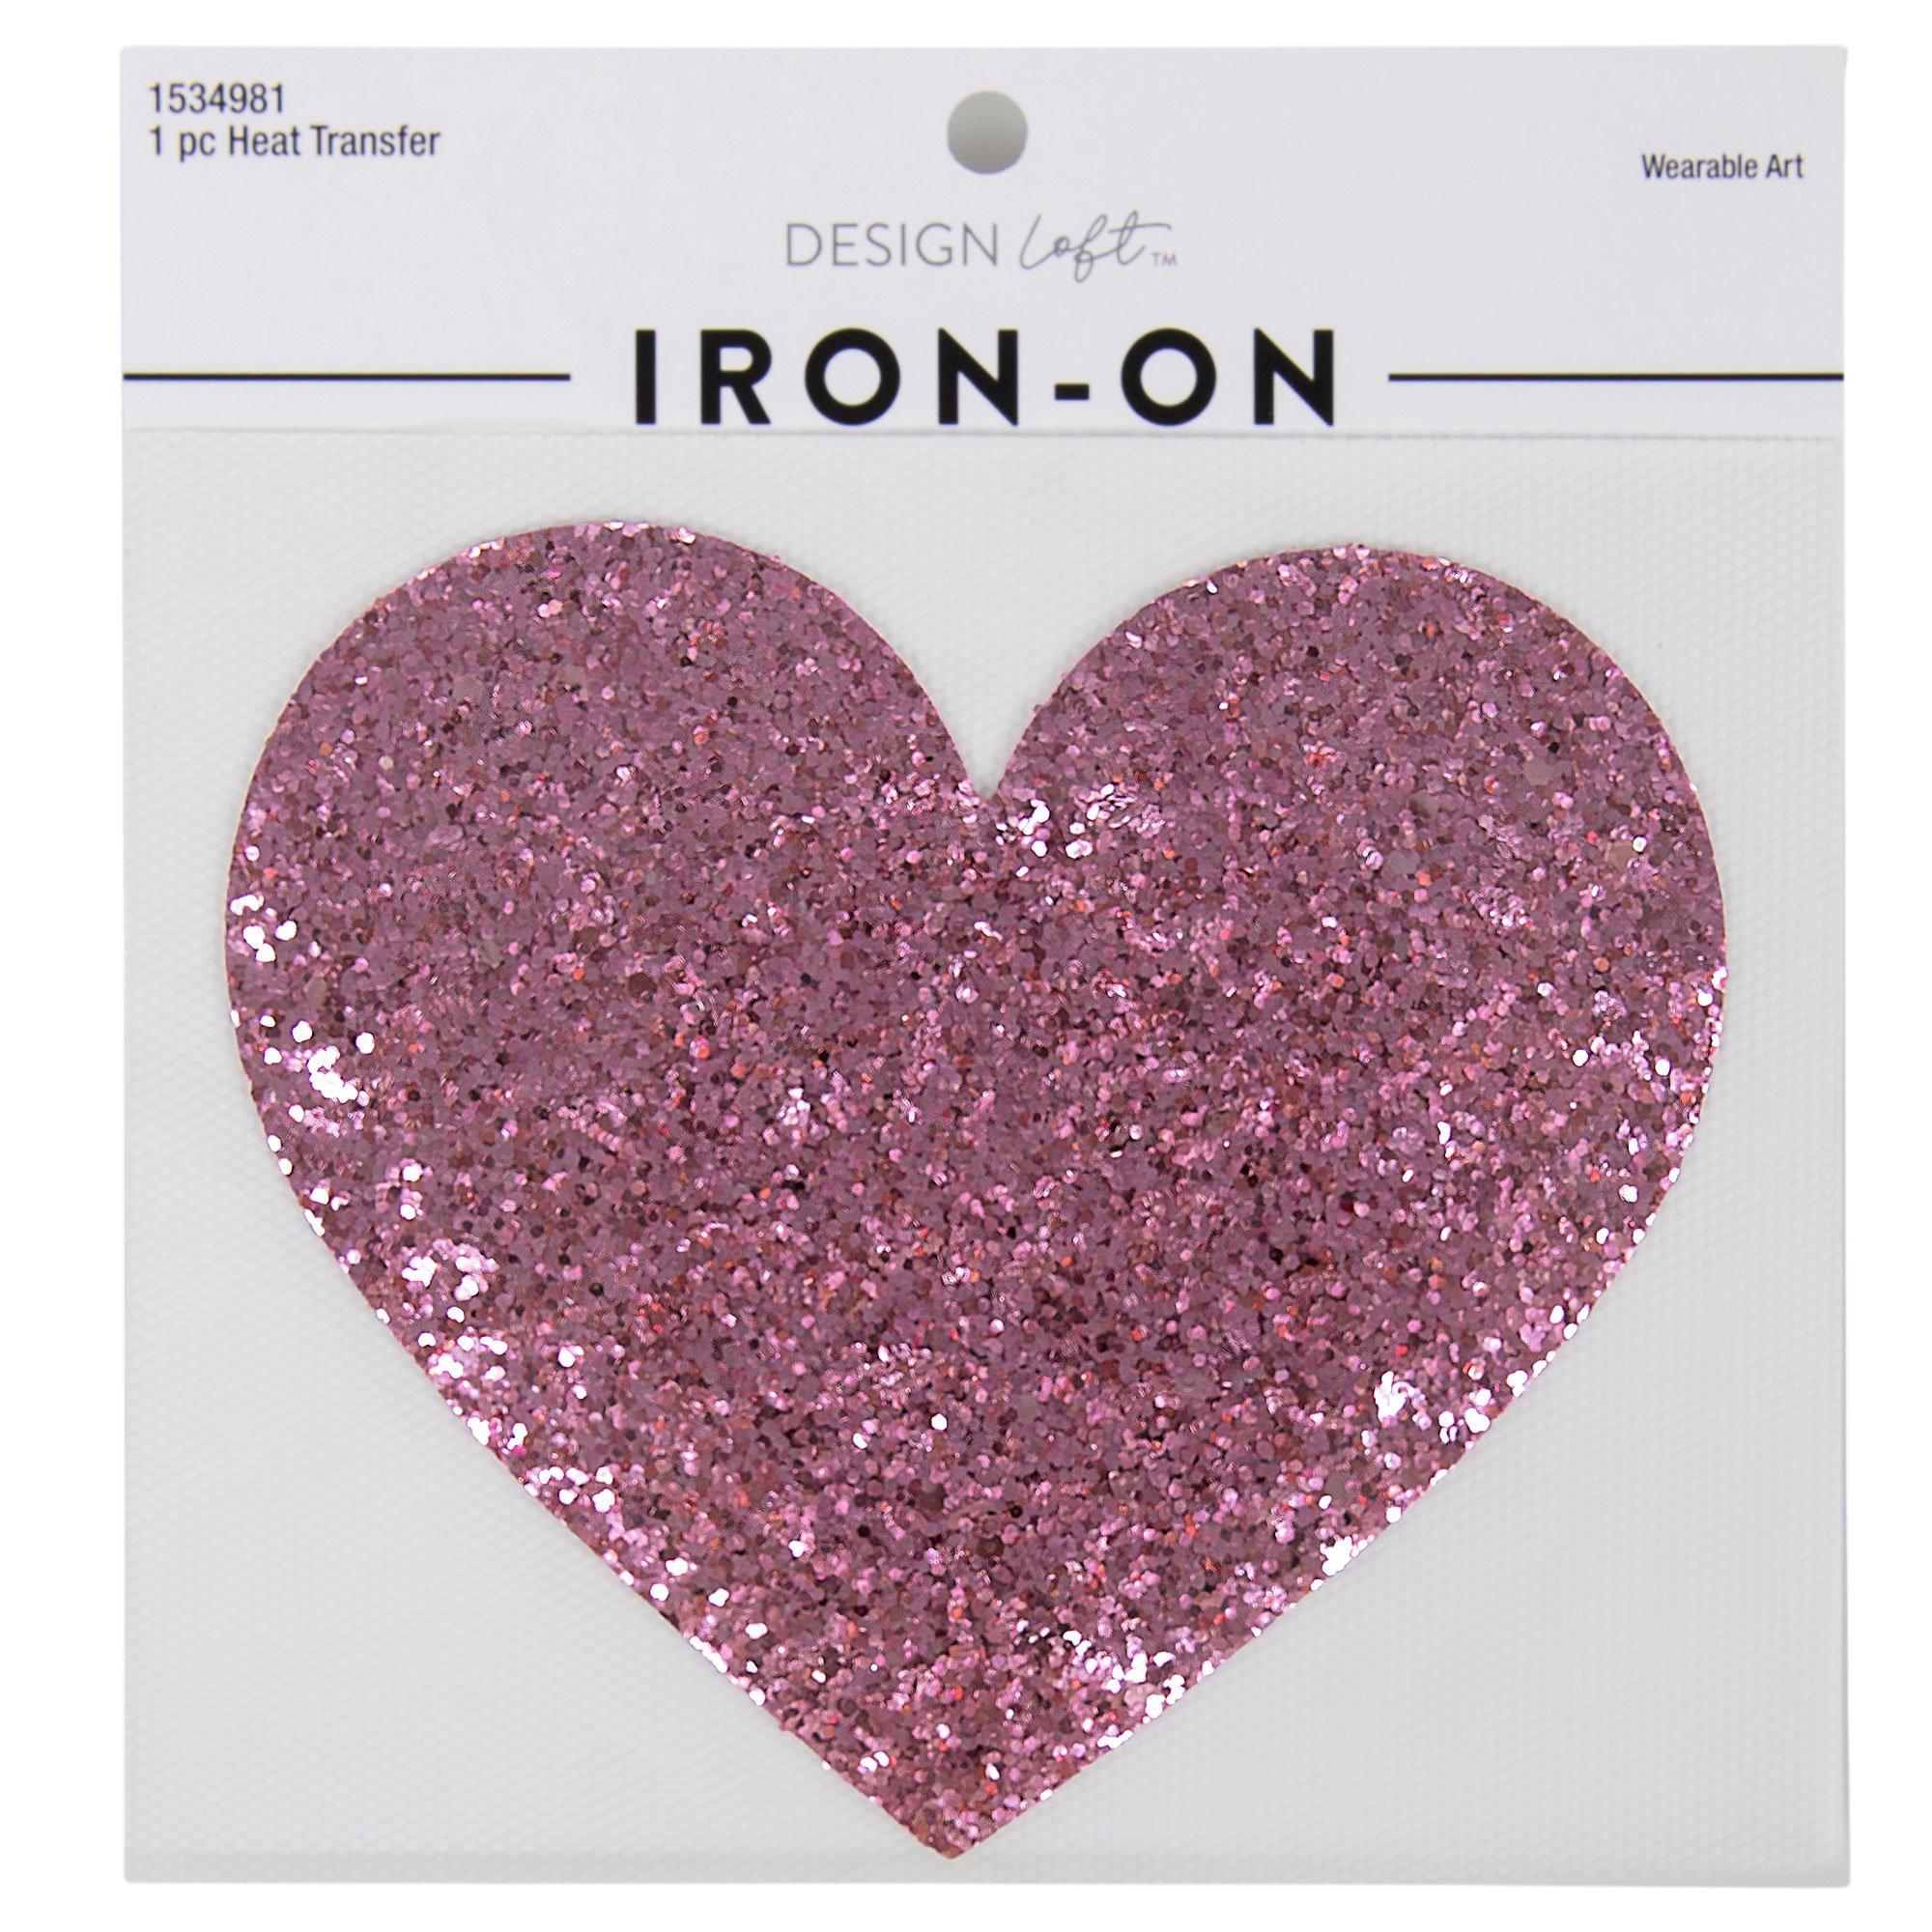 2 Rhinestone Heart Iron on Patch - Iron on Patches & Appliques - Crafts & Hobbies